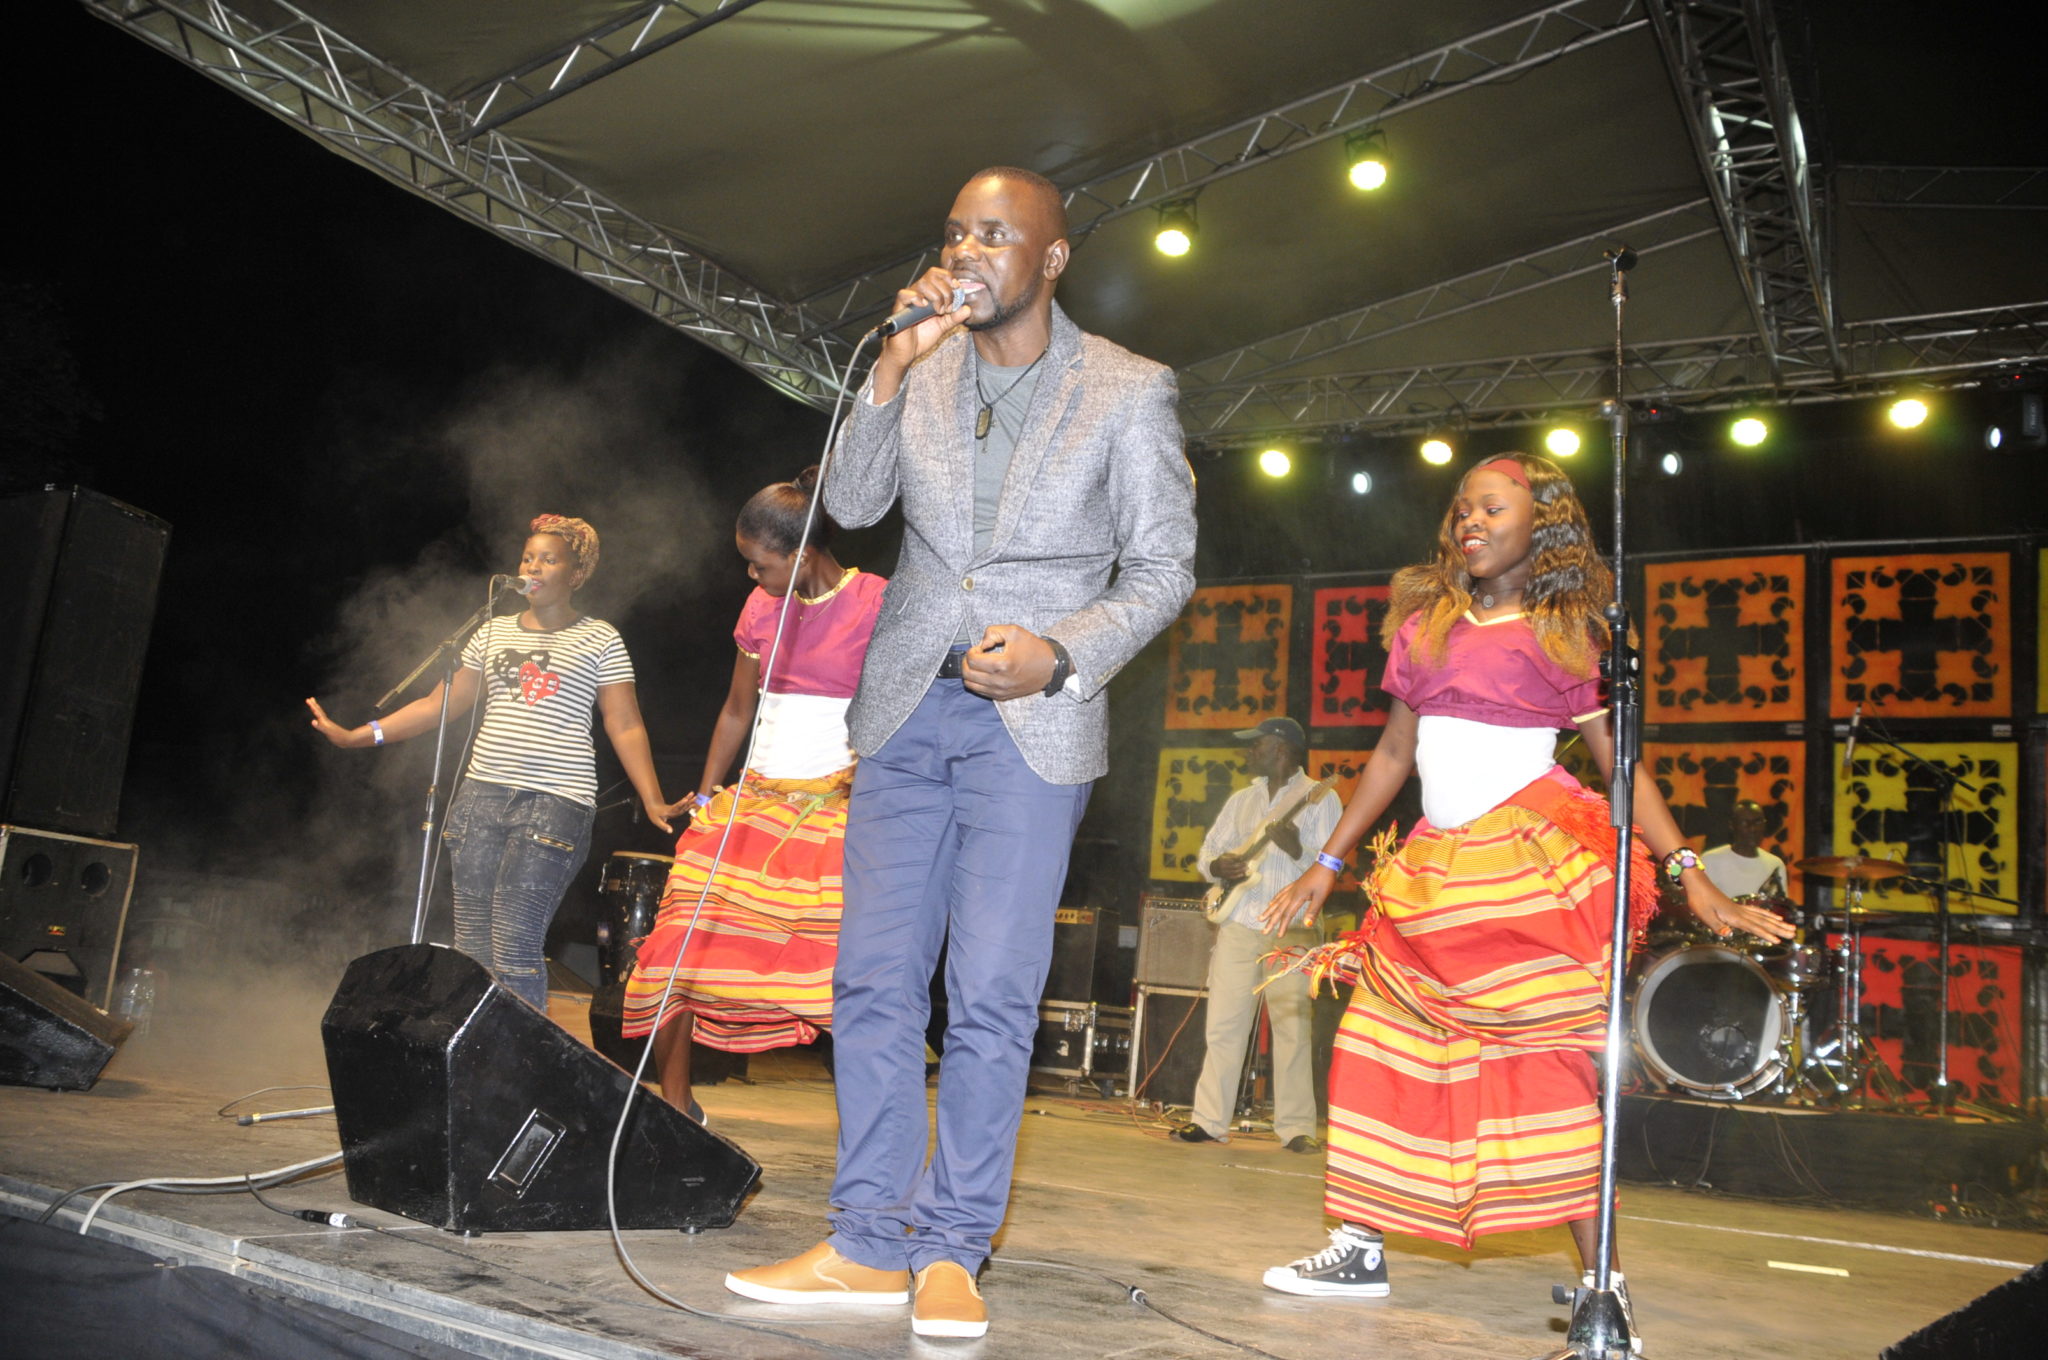 Mathias-Walukaga-was-also-one-of-the-performers-at-the-festival.